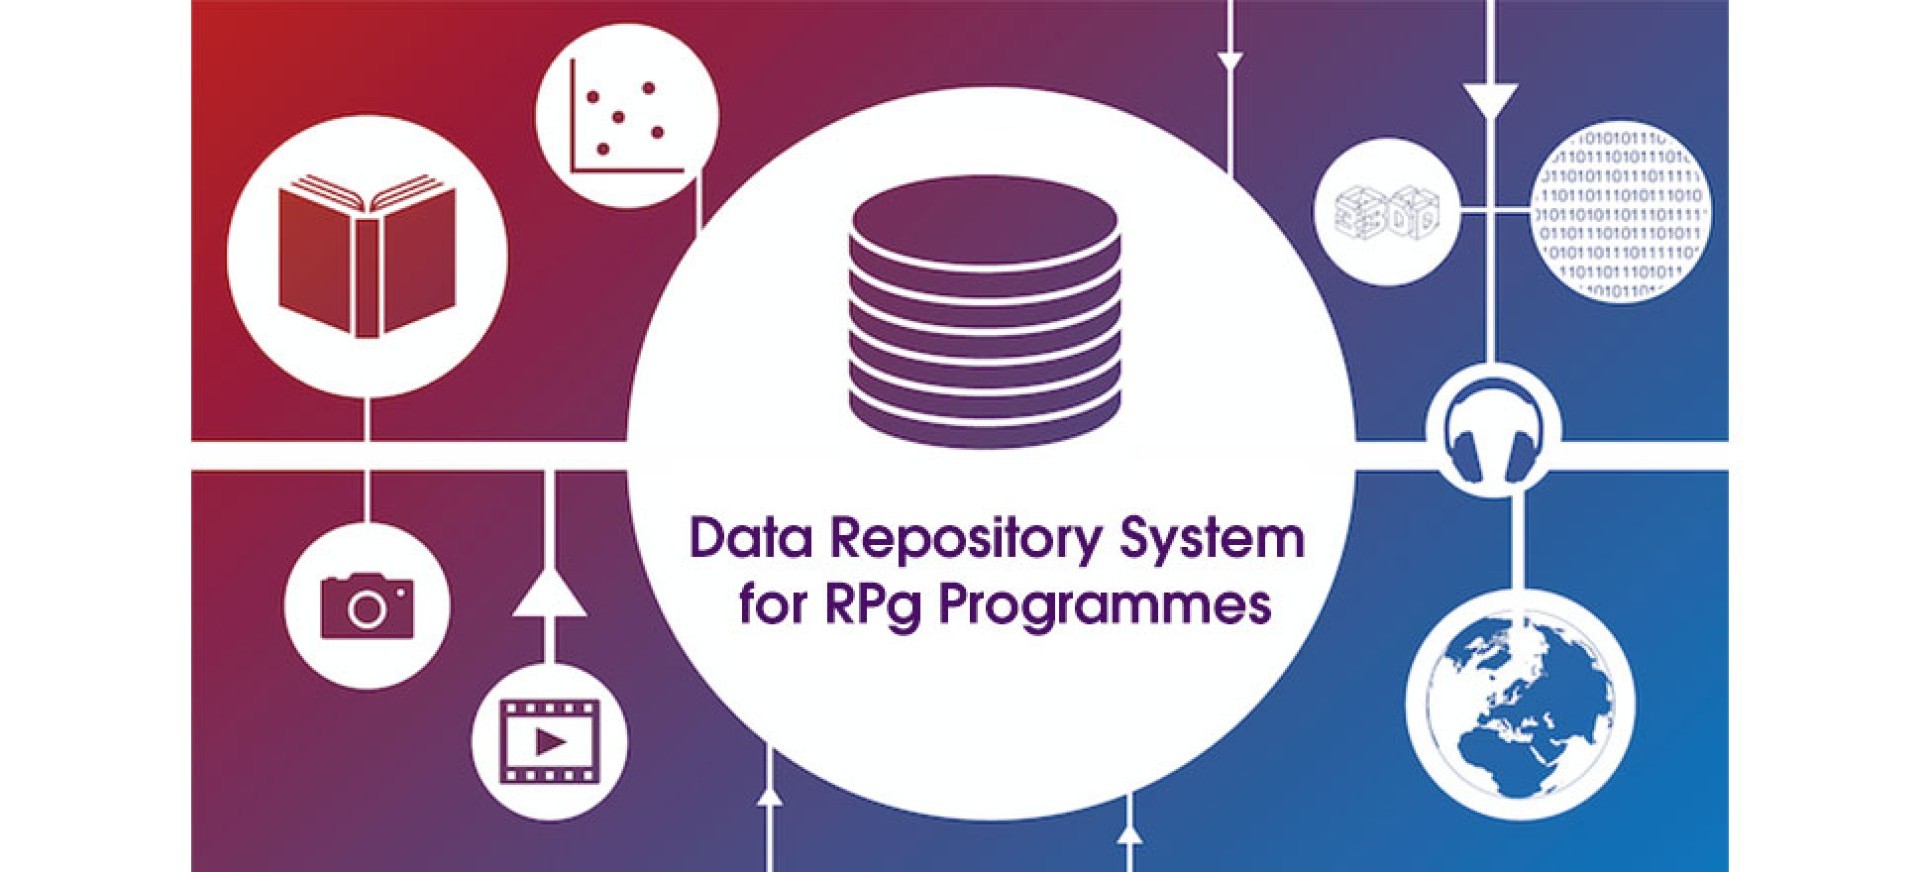 Data Repository System for RPg Programmes